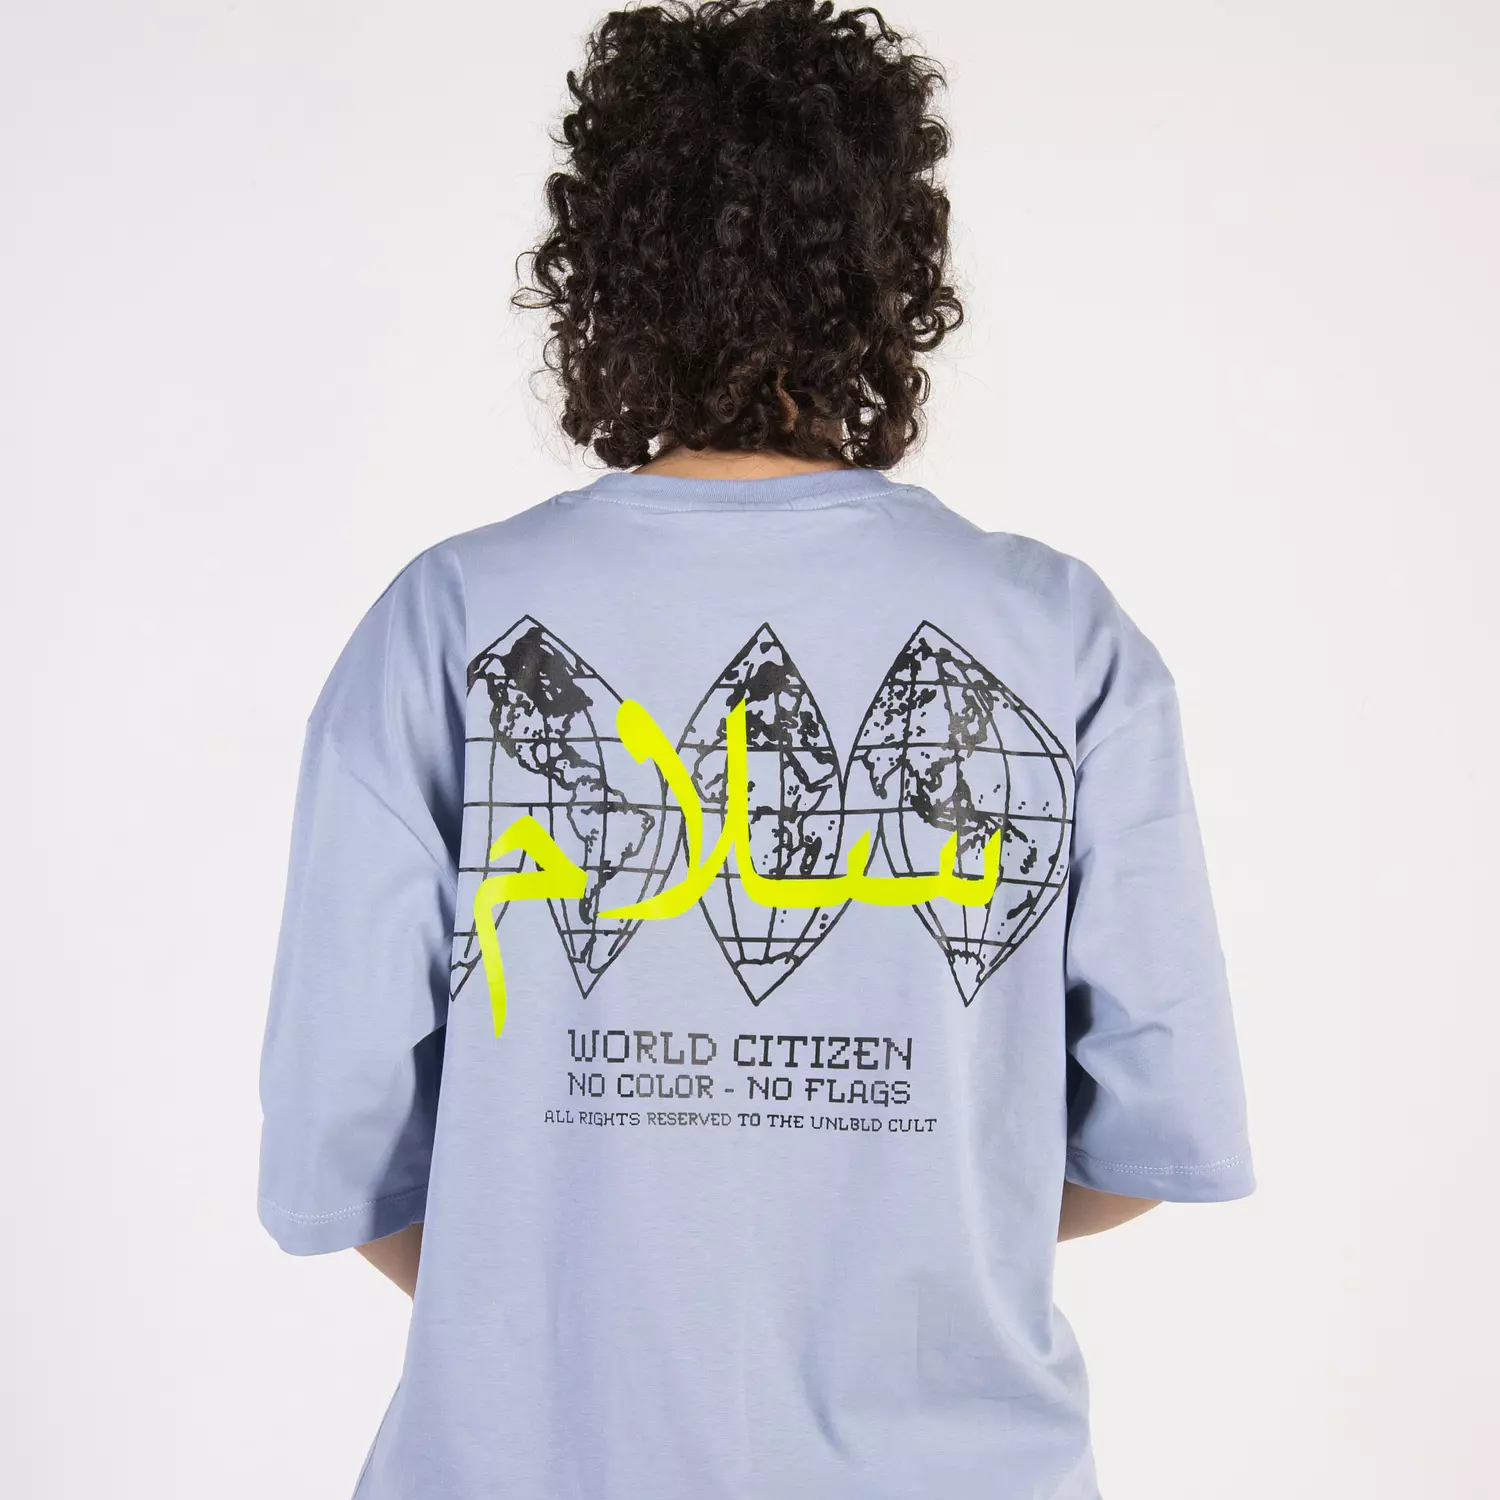 WORLD CITIZEN TEE hover image